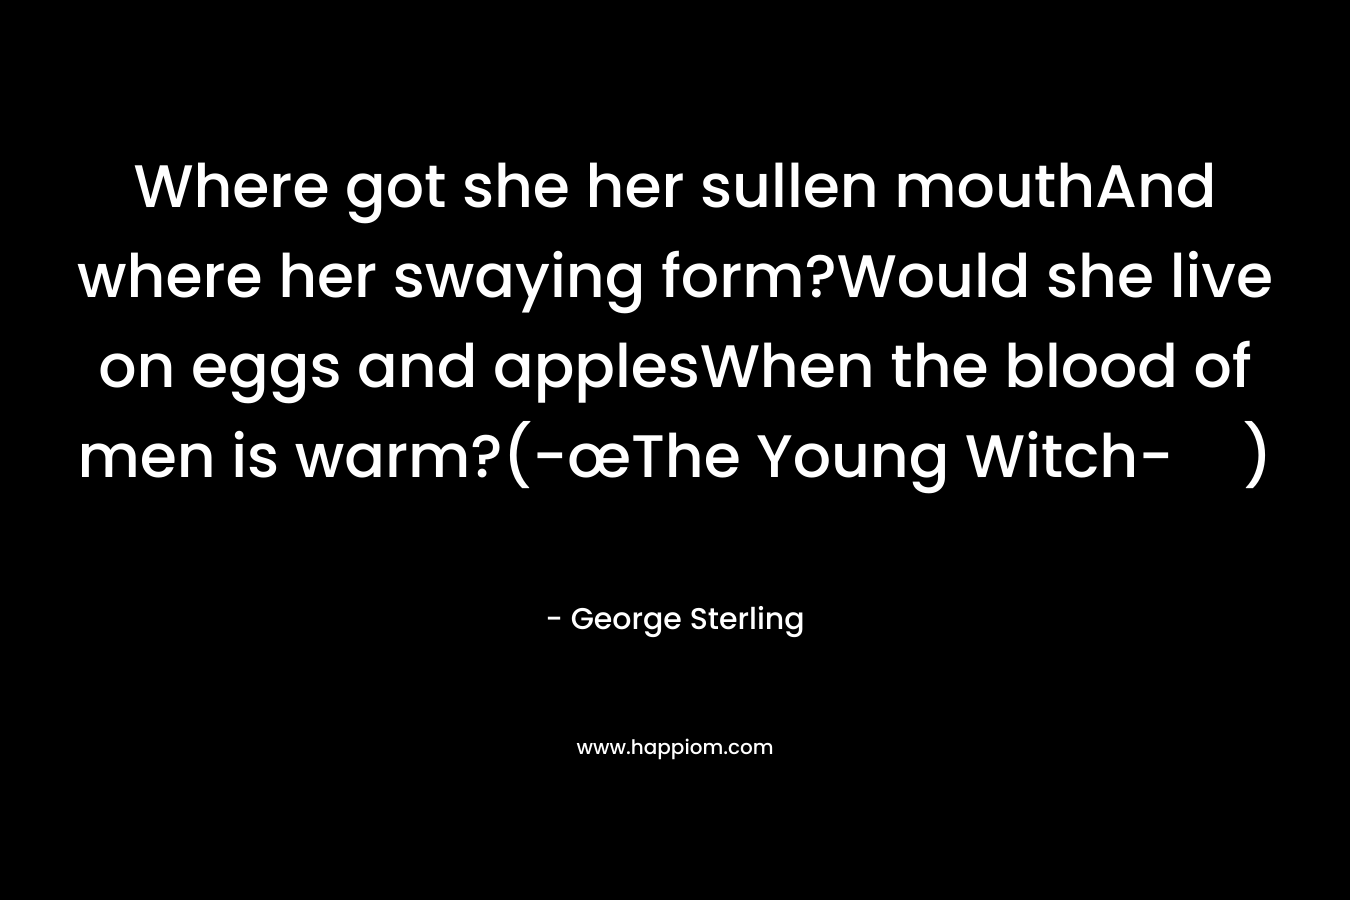 Where got she her sullen mouthAnd where her swaying form?Would she live on eggs and applesWhen the blood of men is warm?(-œThe Young Witch-)